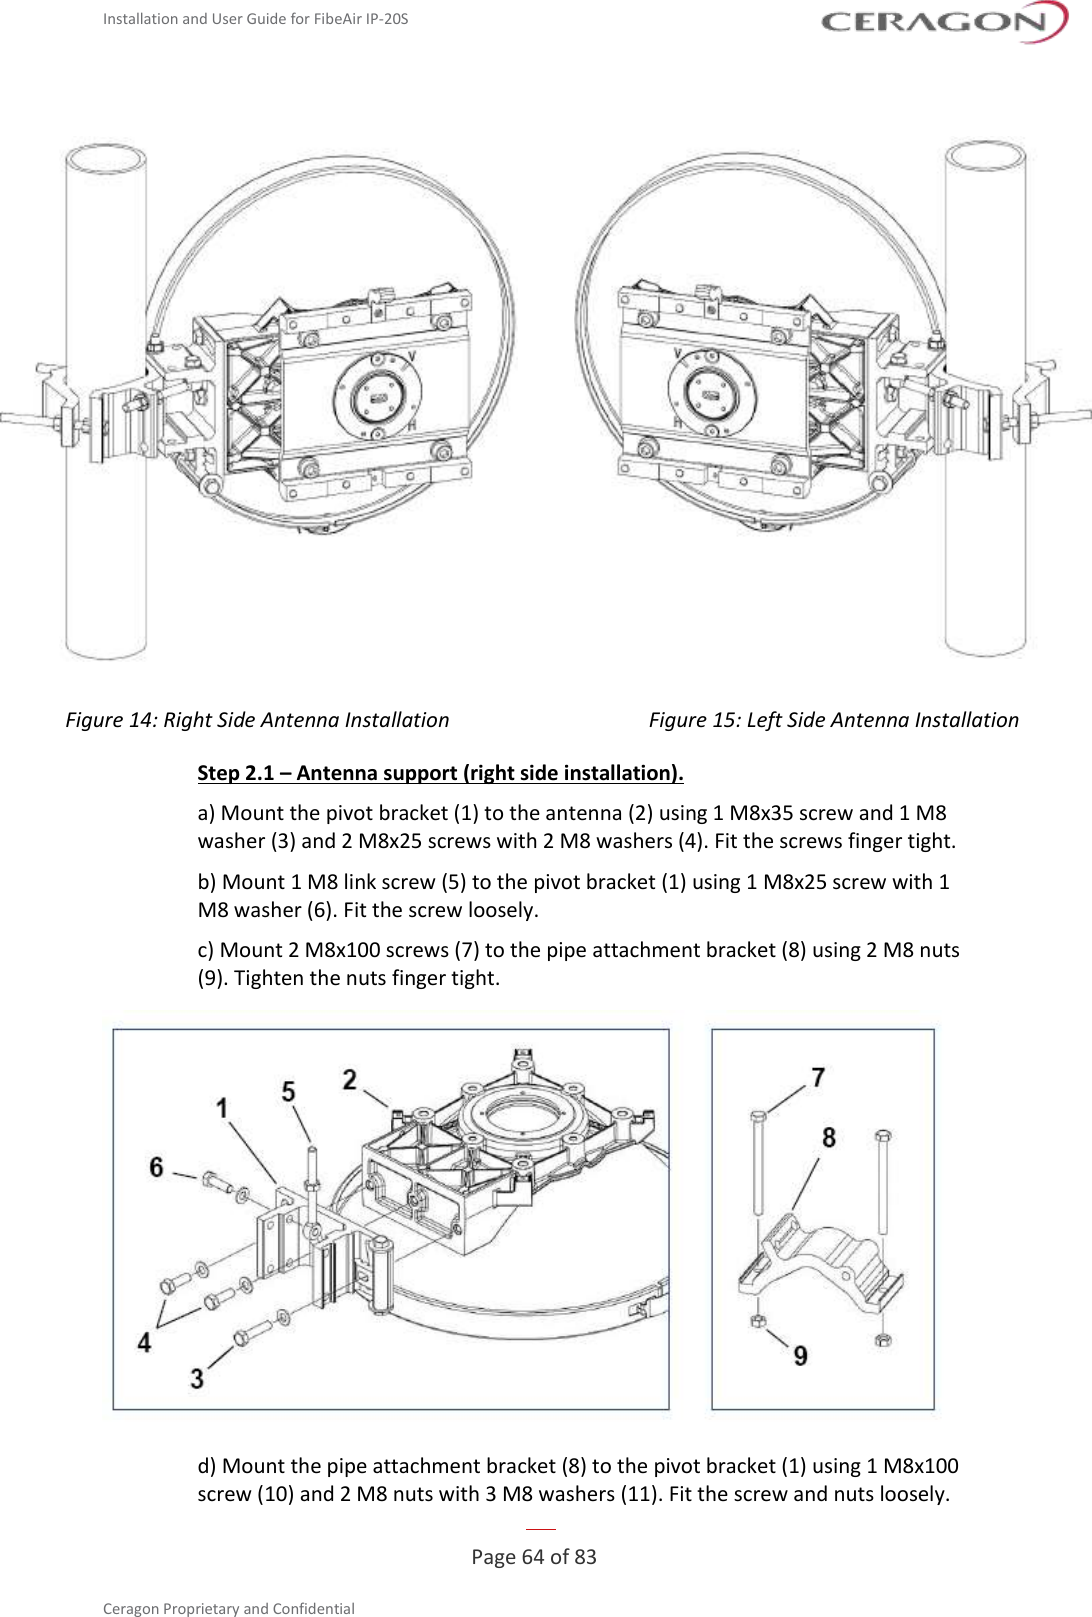 Installation and User Guide for FibeAir IP-20S   Page 64 of 83  Ceragon Proprietary and Confidential       Figure 14: Right Side Antenna Installation Figure 15: Left Side Antenna Installation Step 2.1 – Antenna support (right side installation). a) Mount the pivot bracket (1) to the antenna (2) using 1 M8x35 screw and 1 M8 washer (3) and 2 M8x25 screws with 2 M8 washers (4). Fit the screws finger tight. b) Mount 1 M8 link screw (5) to the pivot bracket (1) using 1 M8x25 screw with 1 M8 washer (6). Fit the screw loosely. c) Mount 2 M8x100 screws (7) to the pipe attachment bracket (8) using 2 M8 nuts (9). Tighten the nuts finger tight.  d) Mount the pipe attachment bracket (8) to the pivot bracket (1) using 1 M8x100 screw (10) and 2 M8 nuts with 3 M8 washers (11). Fit the screw and nuts loosely. 